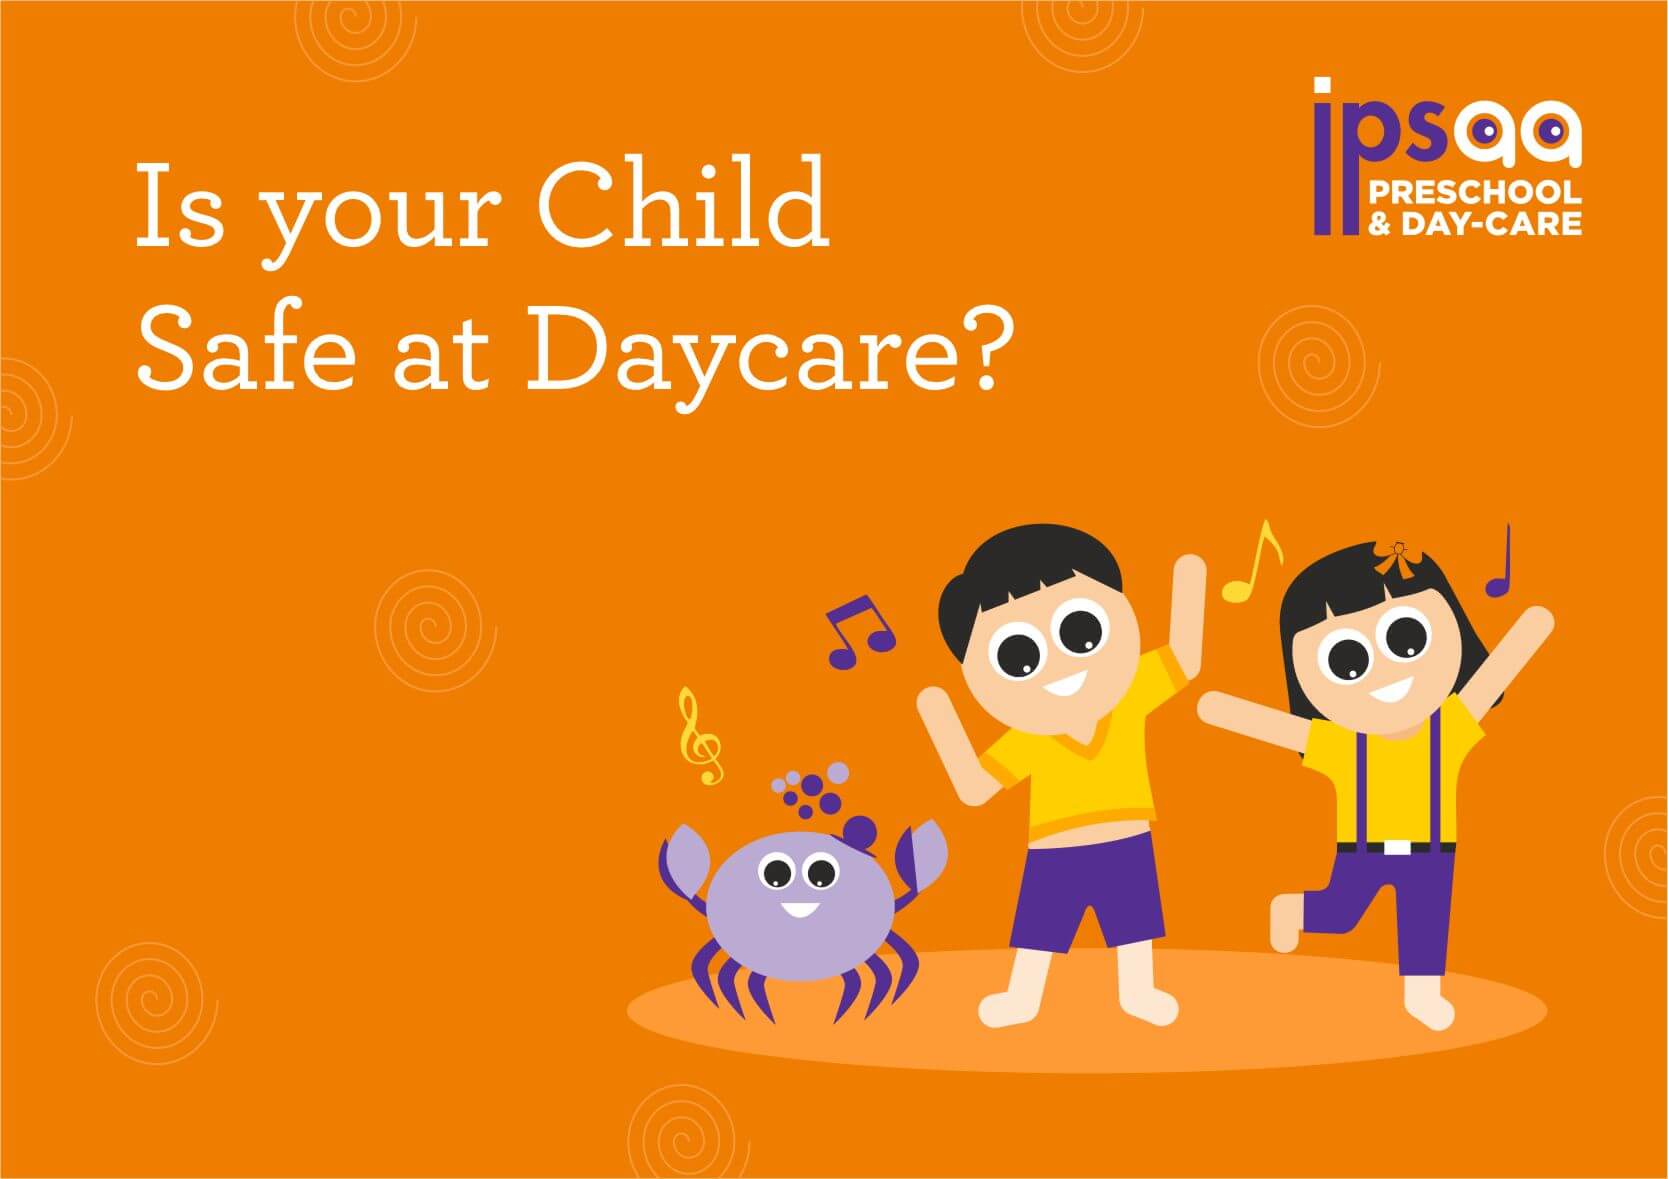 Is your Child safe at Daycare?